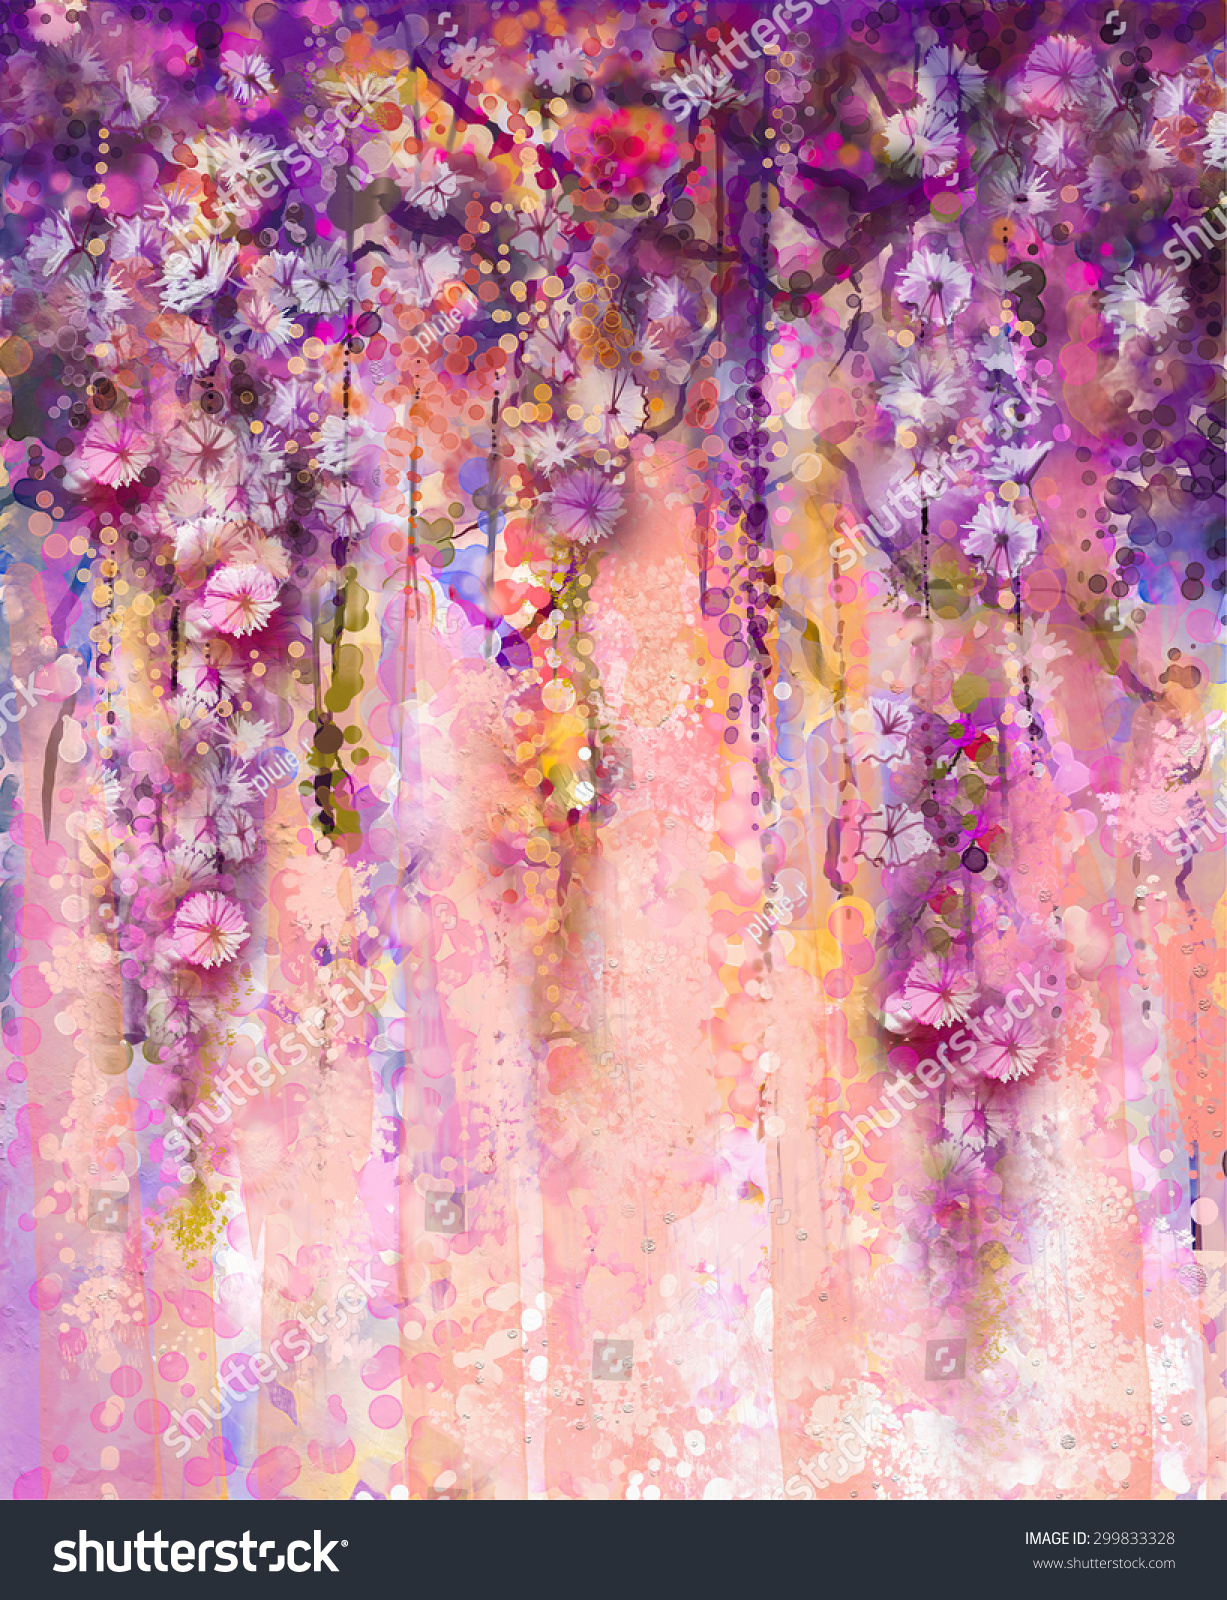 stock photo abstract flowers watercolor painting spring purple flowers wisteria with bokeh background 299833328